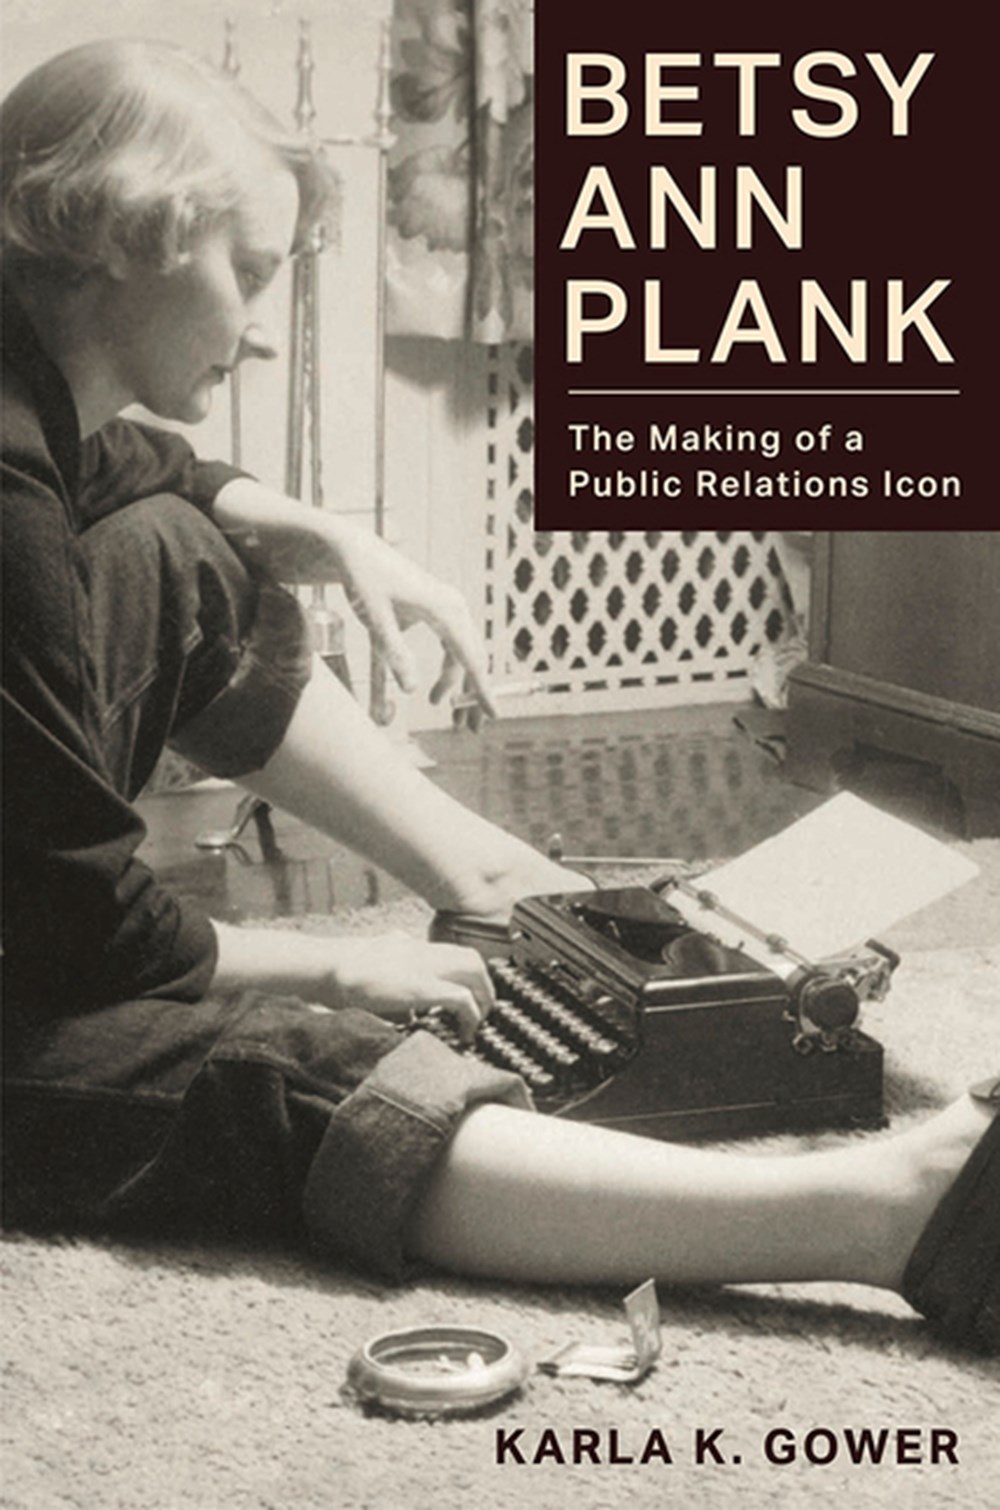 Betsy Ann Plank The Making of a Public Relations Icon